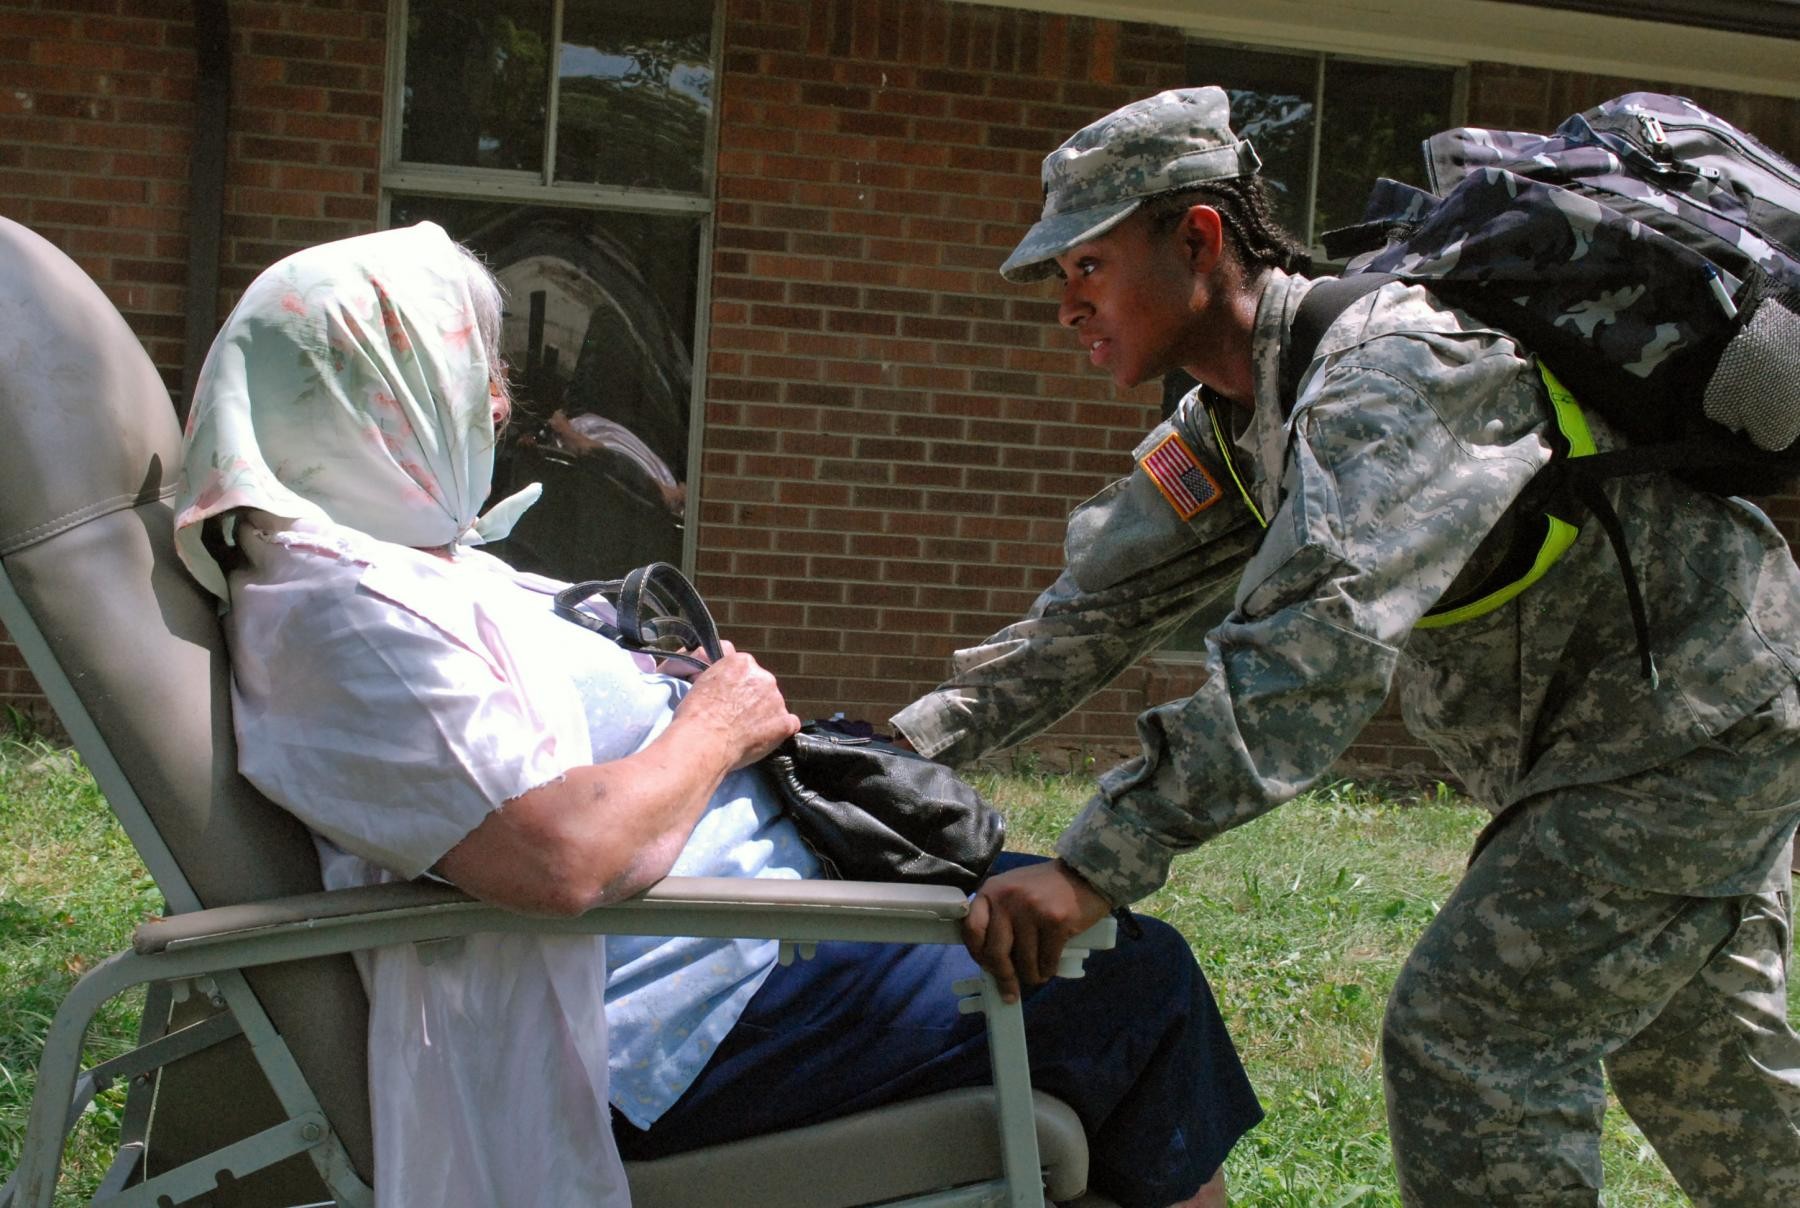 Fort Benning junior enlisted soldiers aid senior citizens during